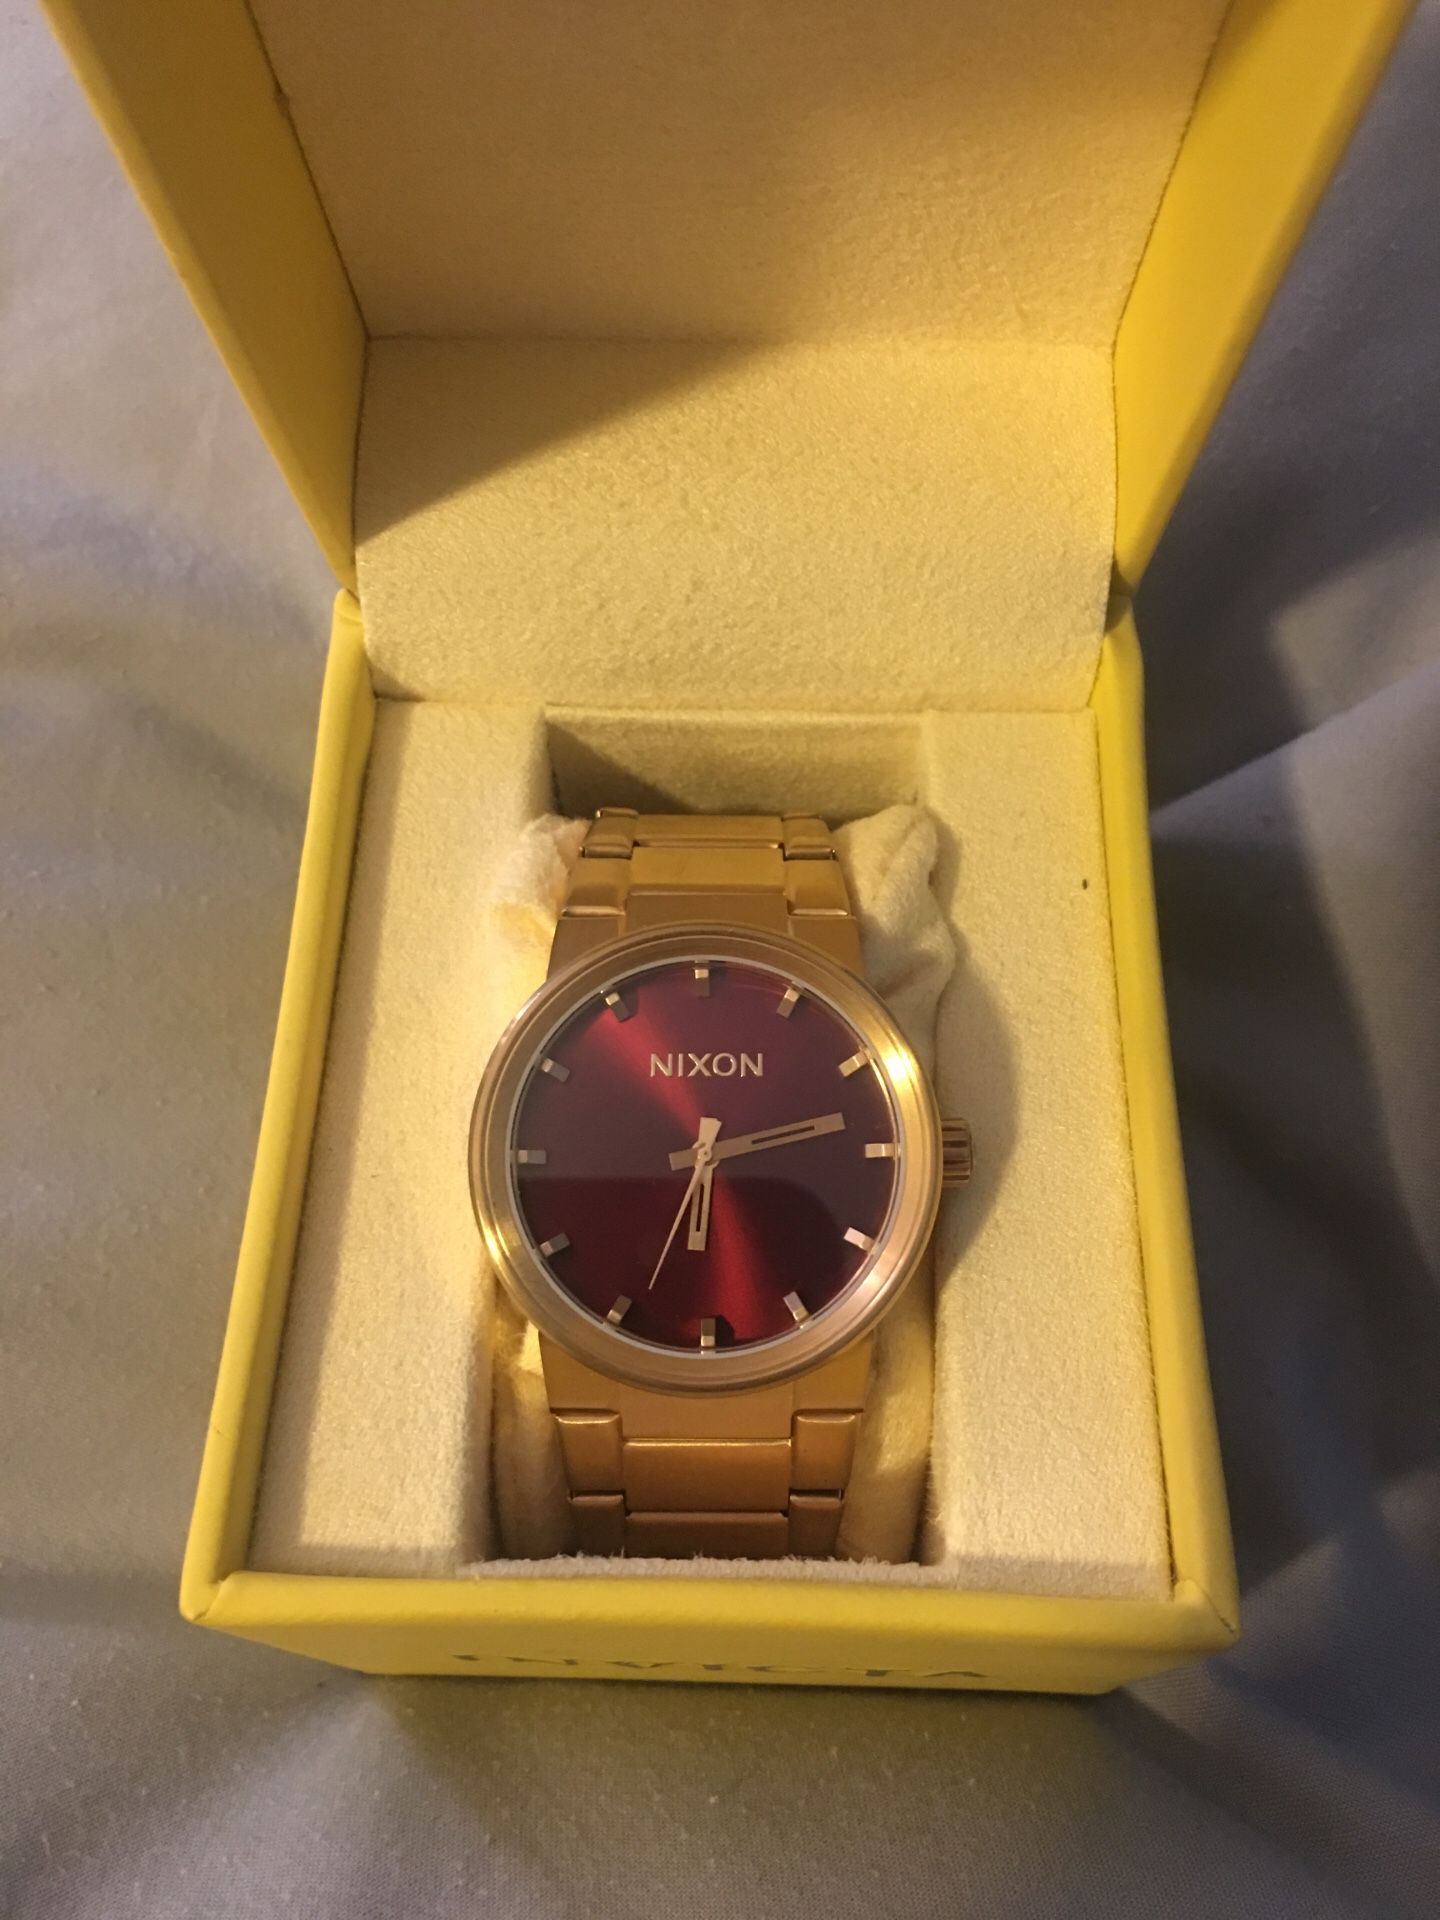 Men's Nixon watch gold/red face for Sale in Gig Harbor, WA - OfferUp